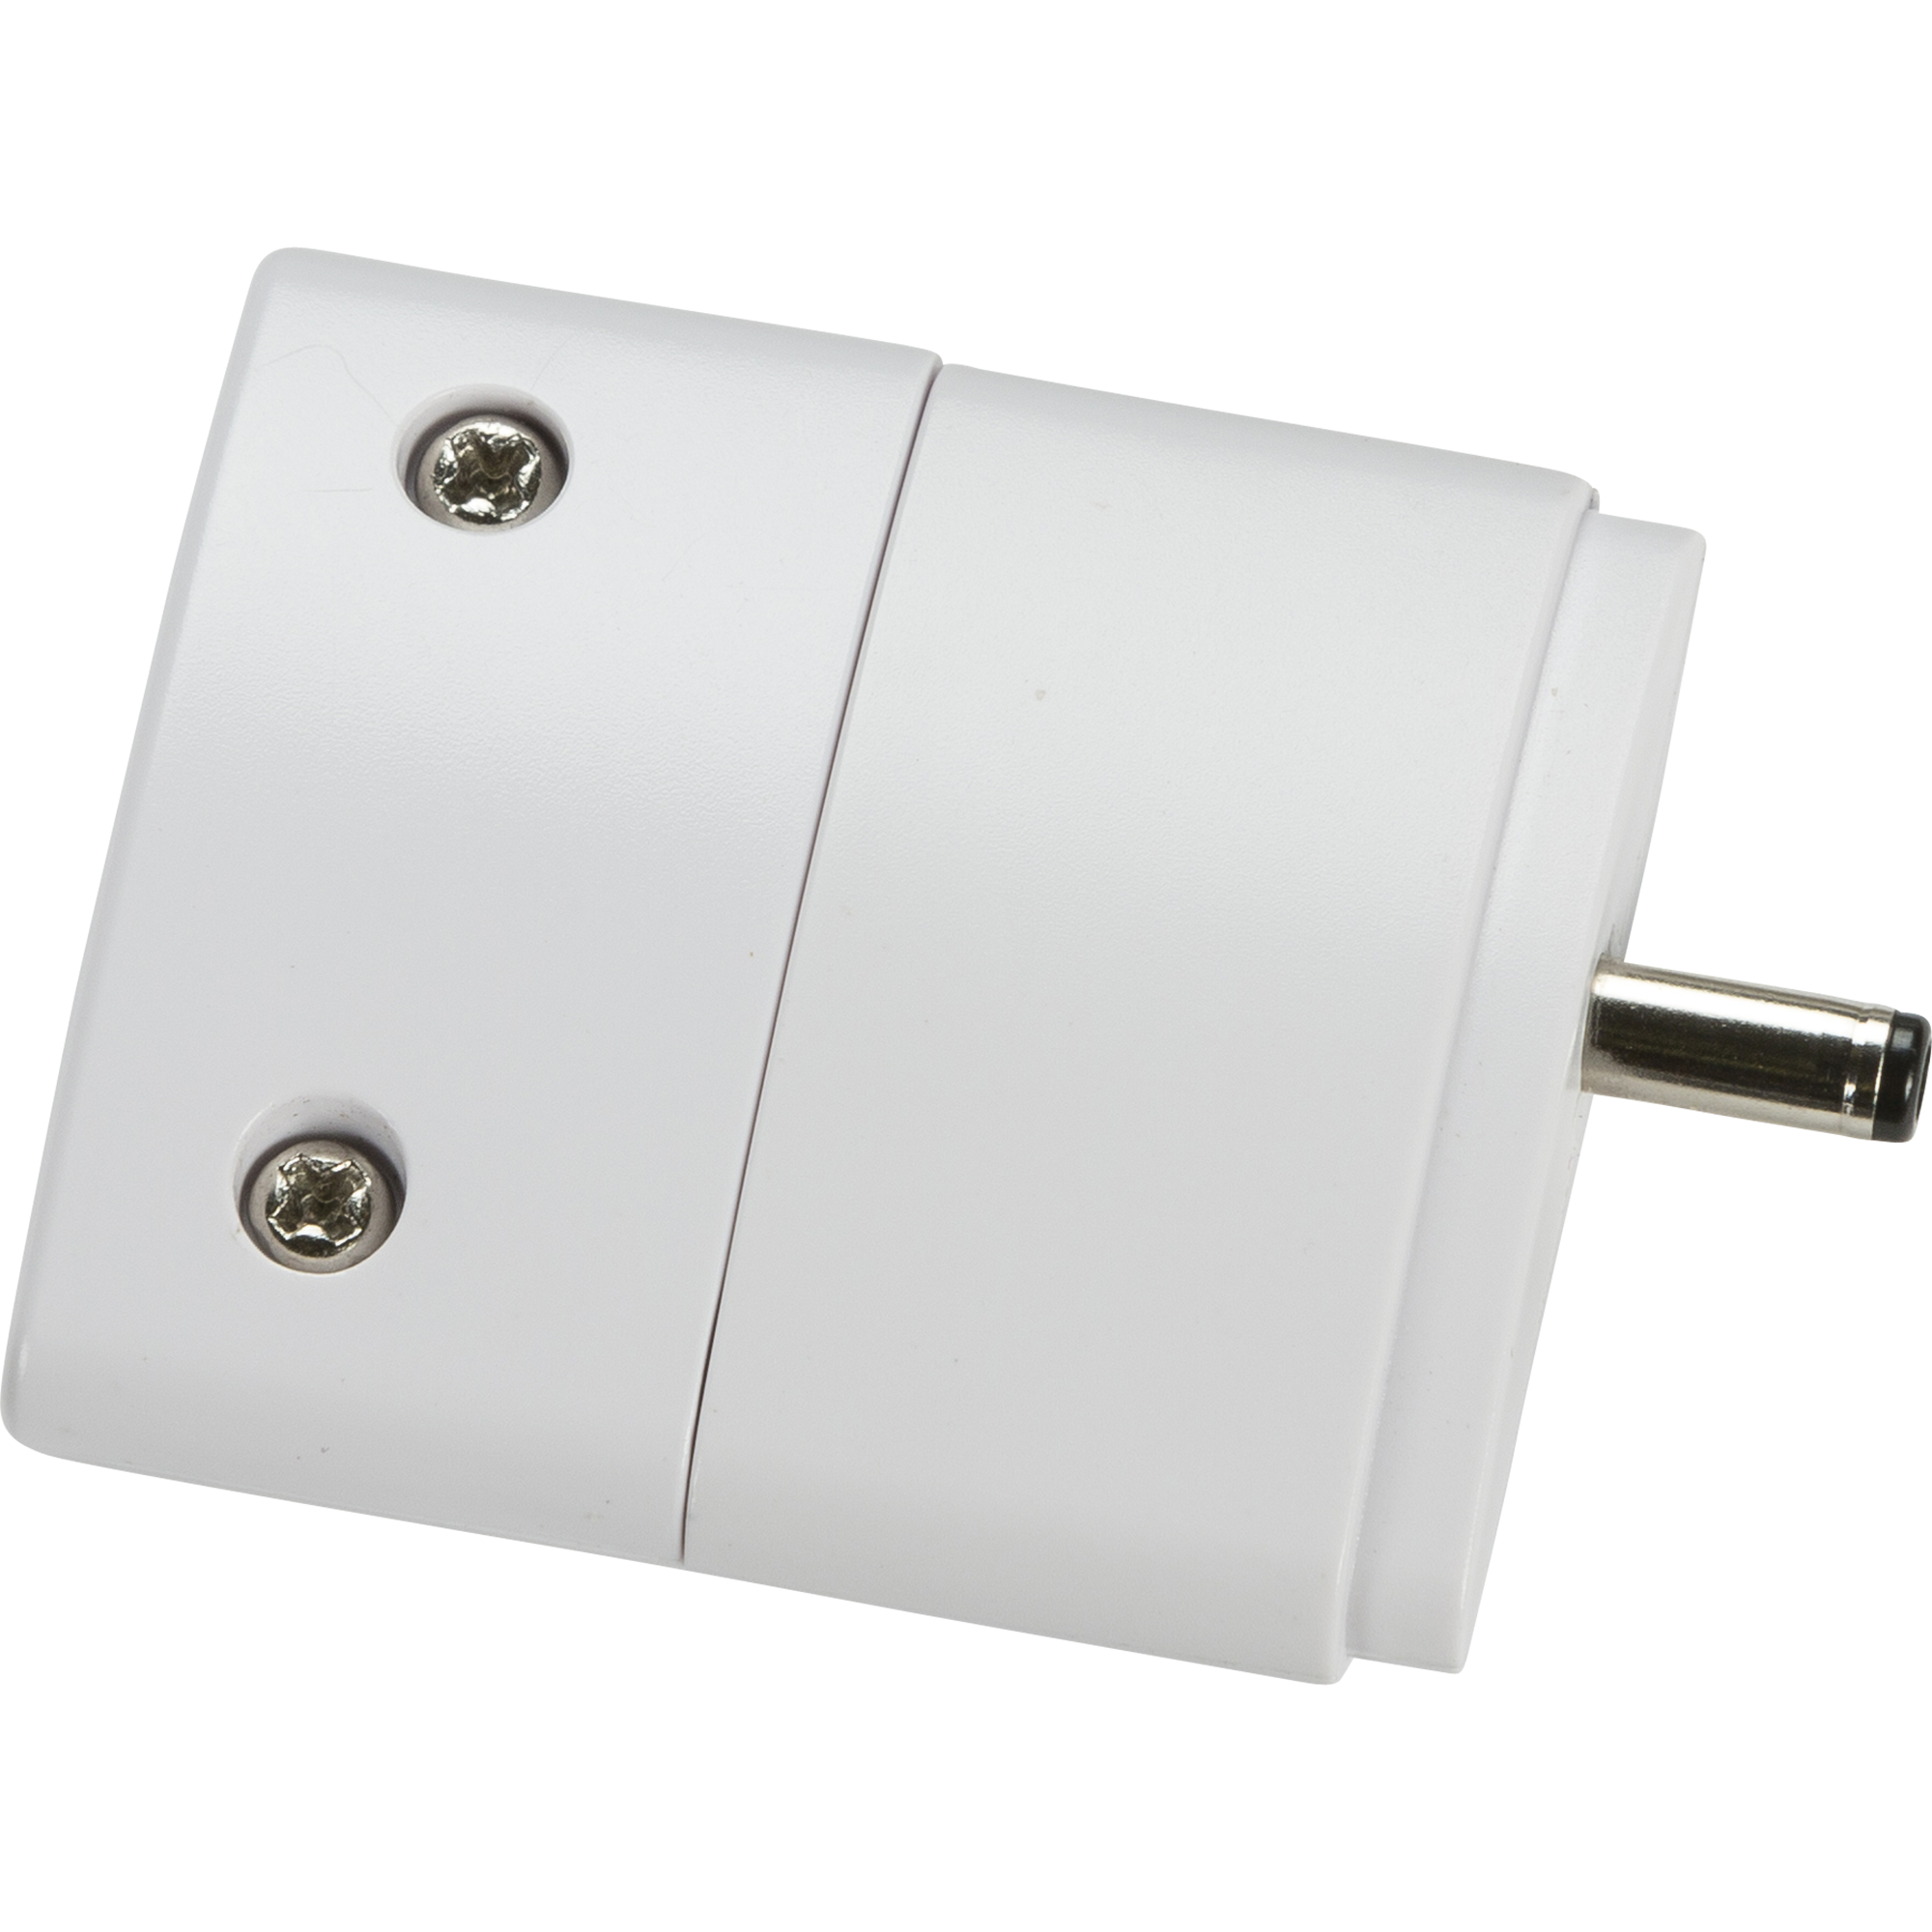 Live End Power Connector For UCL Linear Under Cabinet Lighting - UCLJB 